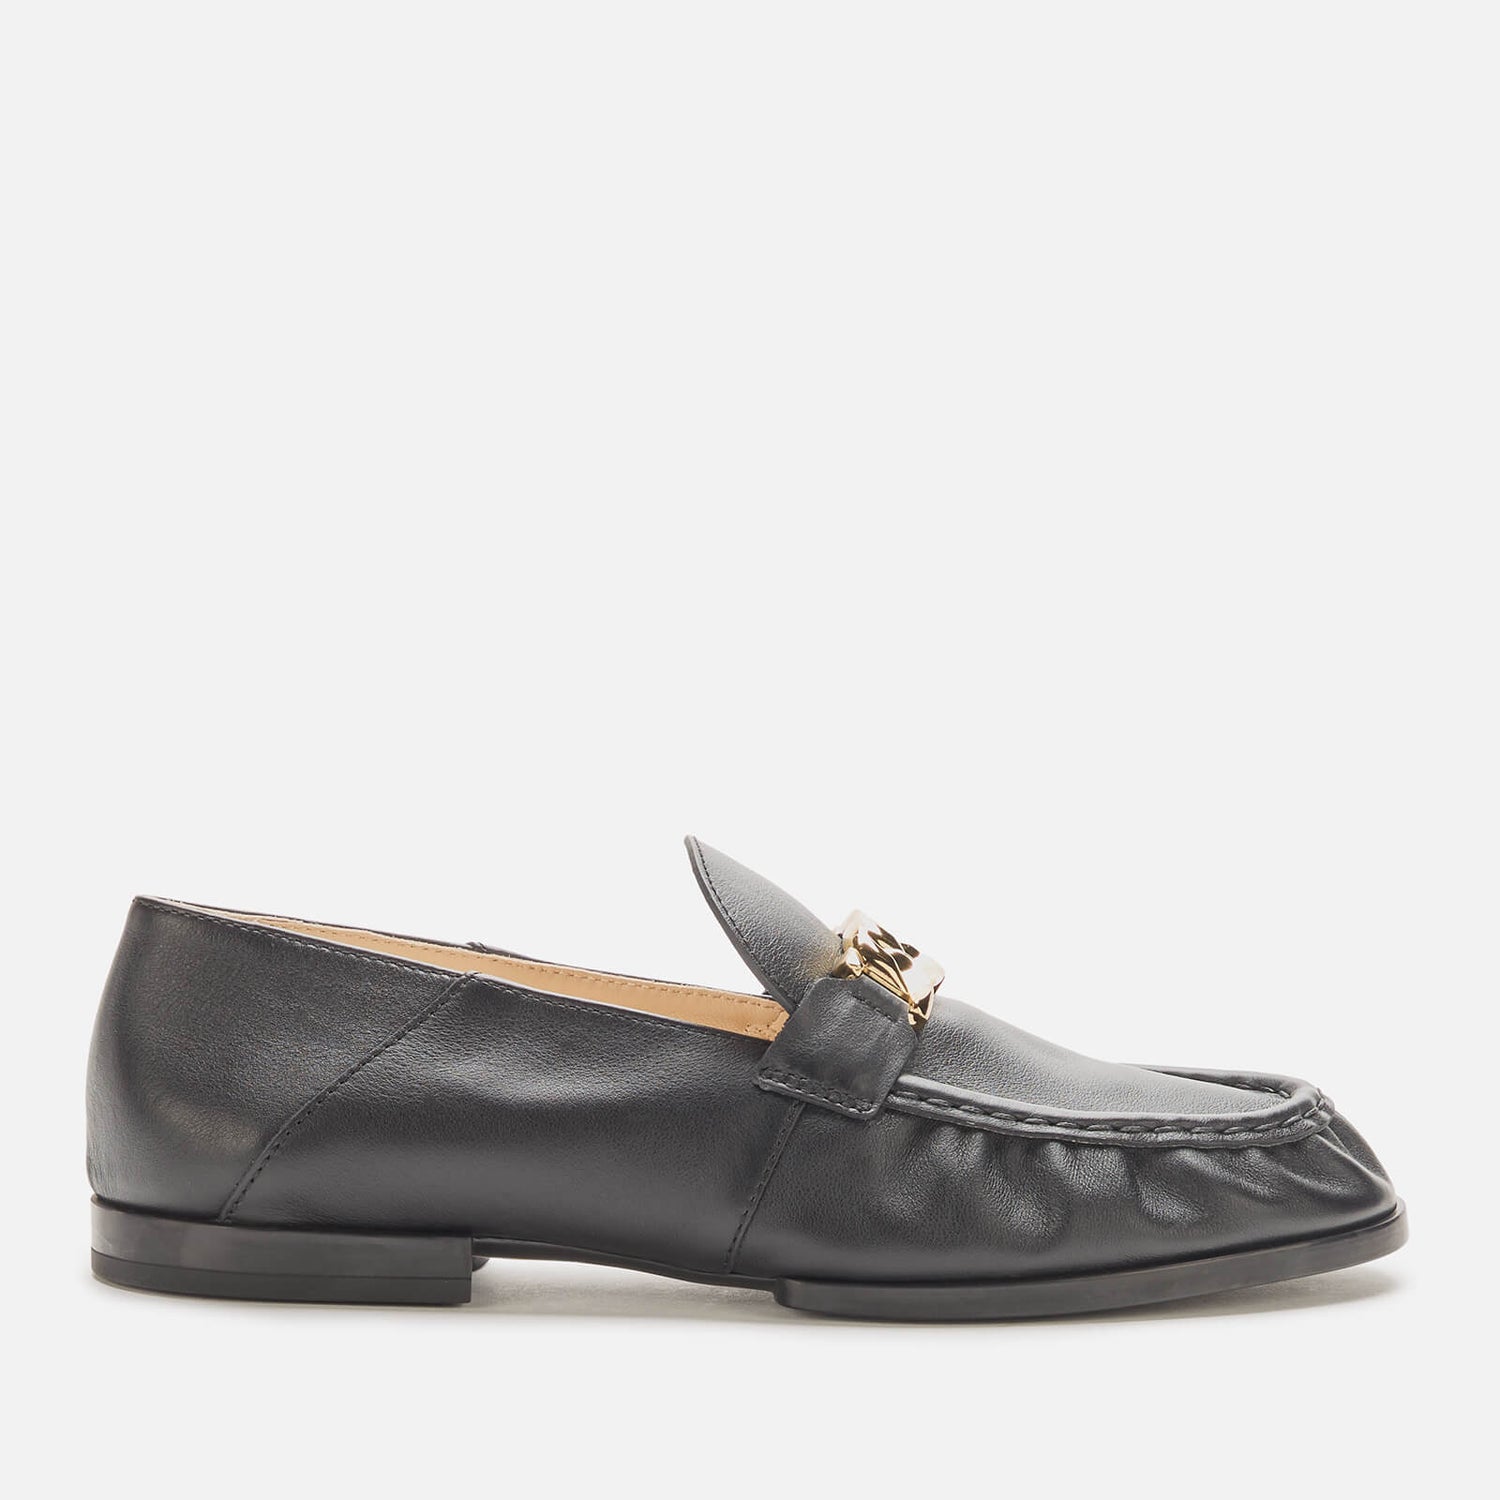 Tod's Women's Chain Detail Leather Loafers - Black - UK 3